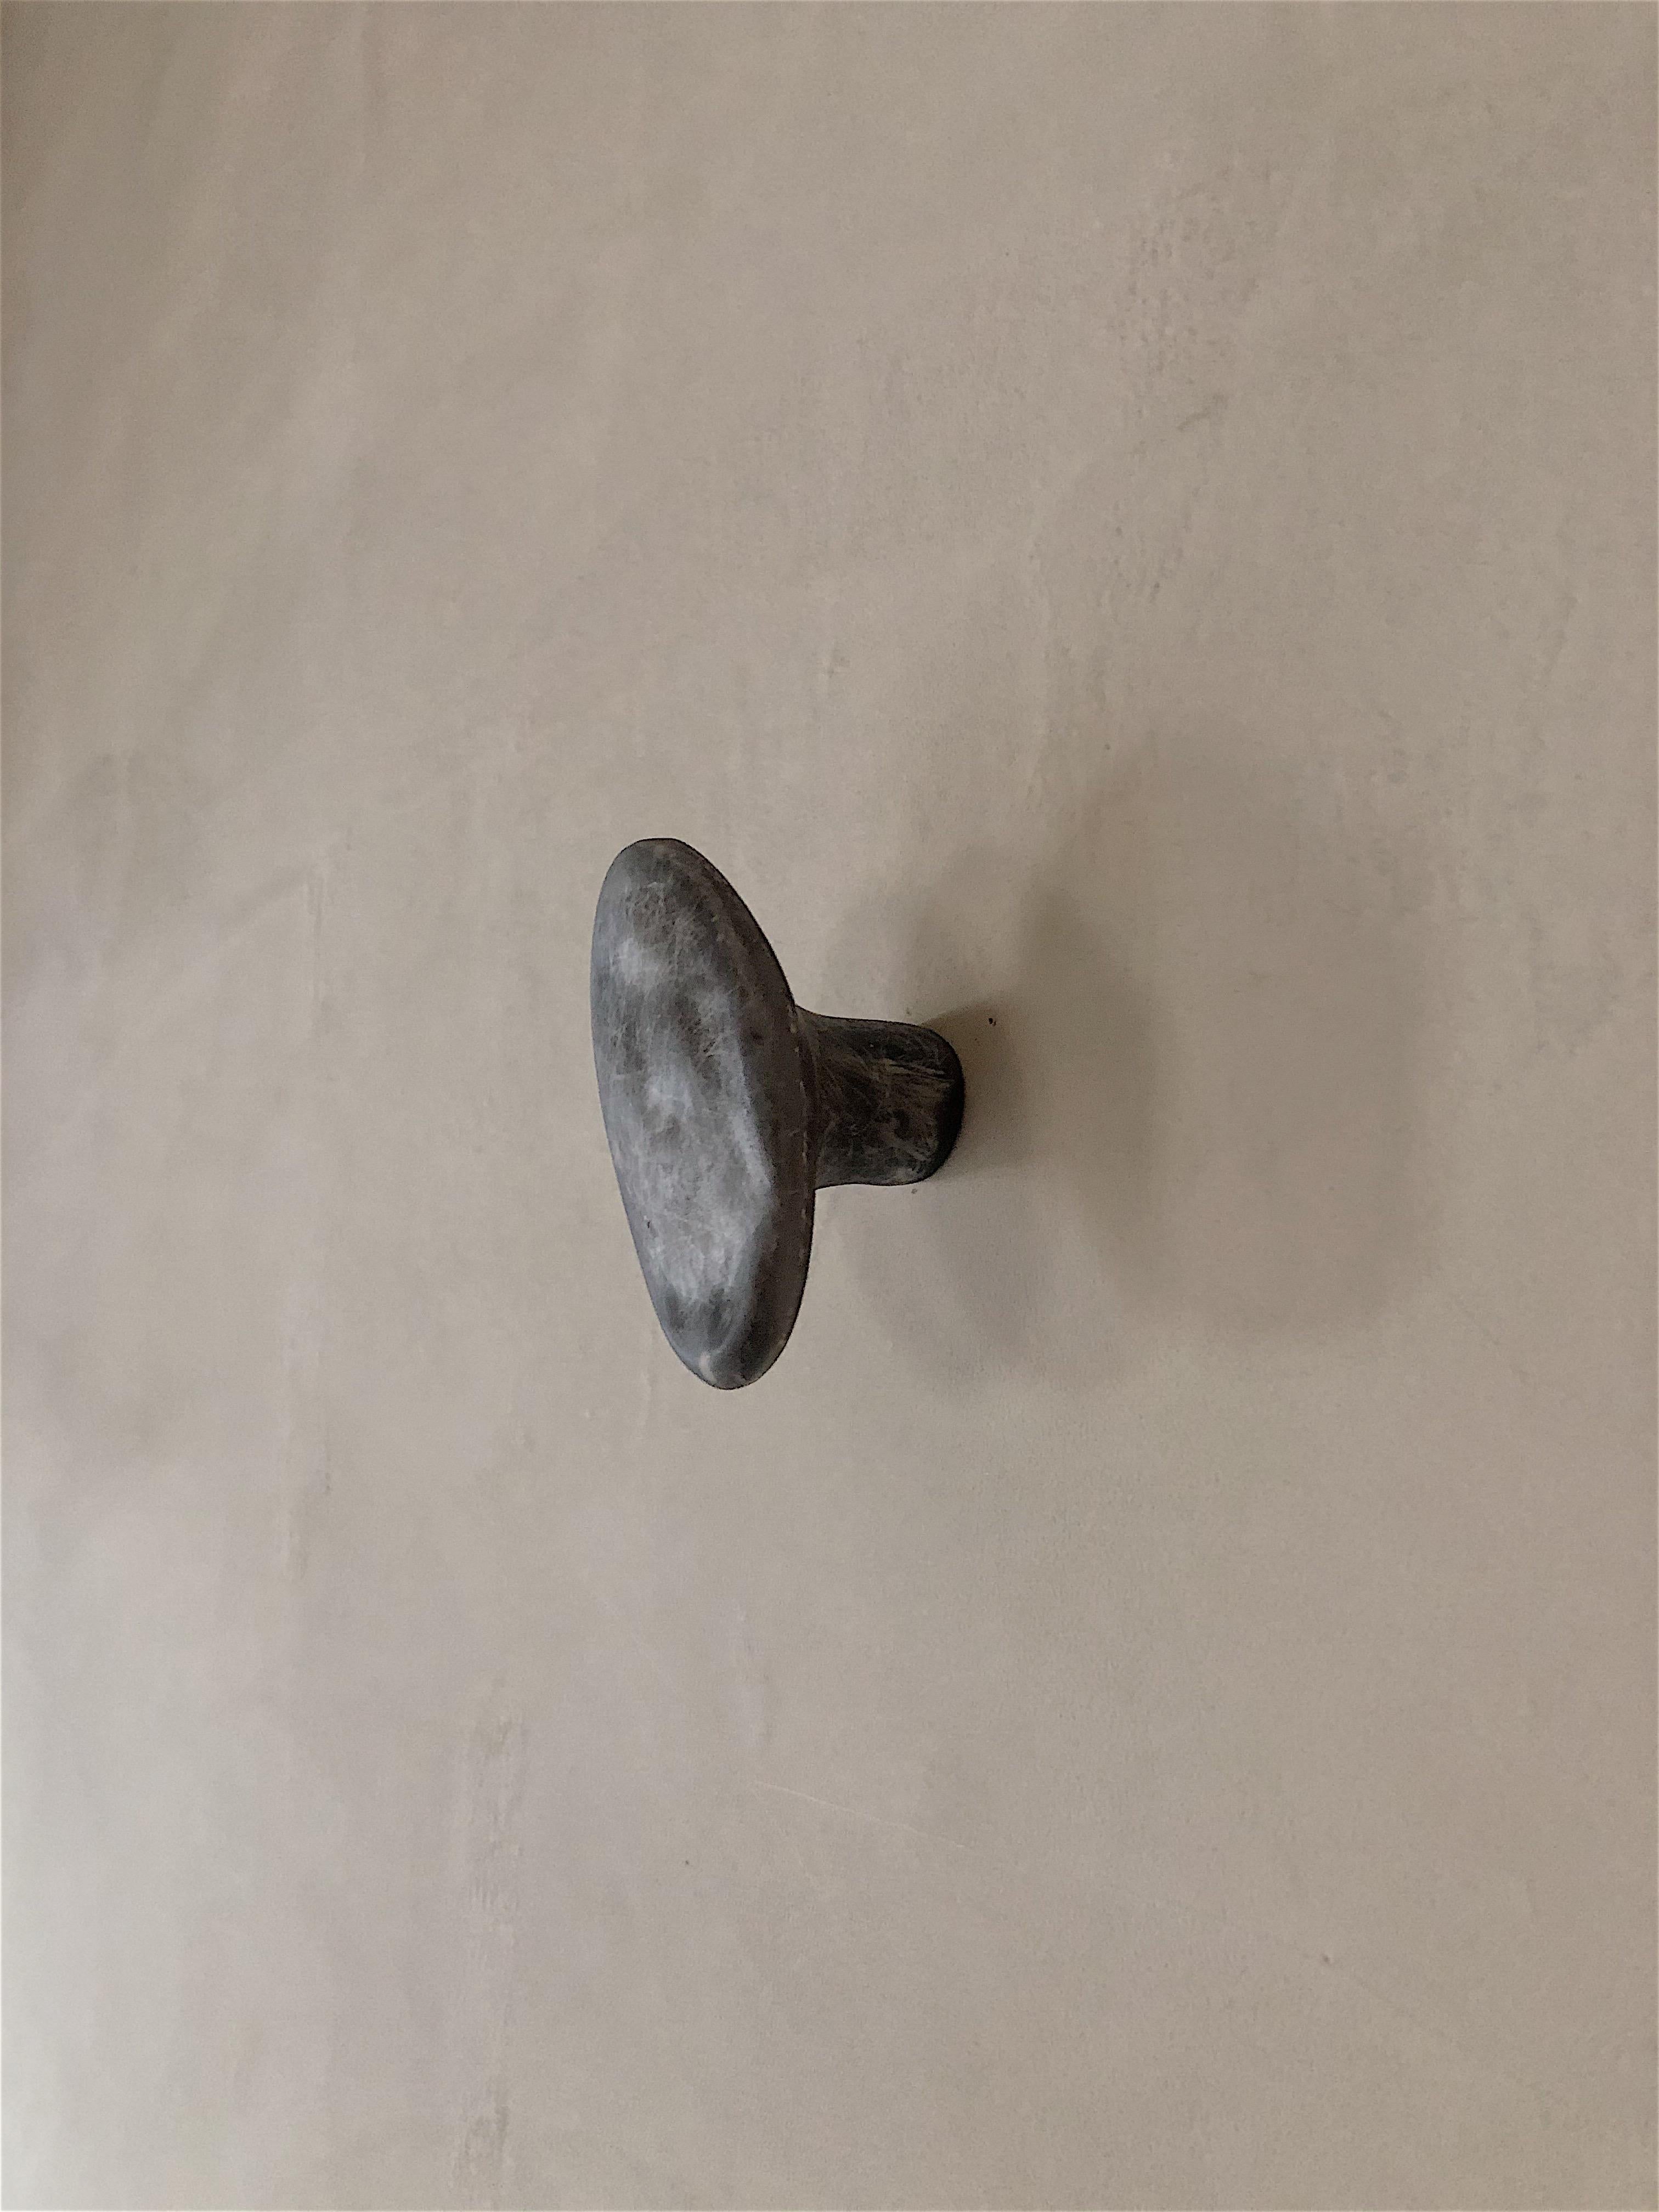 Cobble hook by kar
Dimensions: W 6 x D 5.5 x H 1 cm.
Materials: FRP.
Other colors available.

Like a jade in the rough, it could be use as a hook or door handle; the hook with irregular lines brings fun to a monotonous line-straight door.
 
Kar is